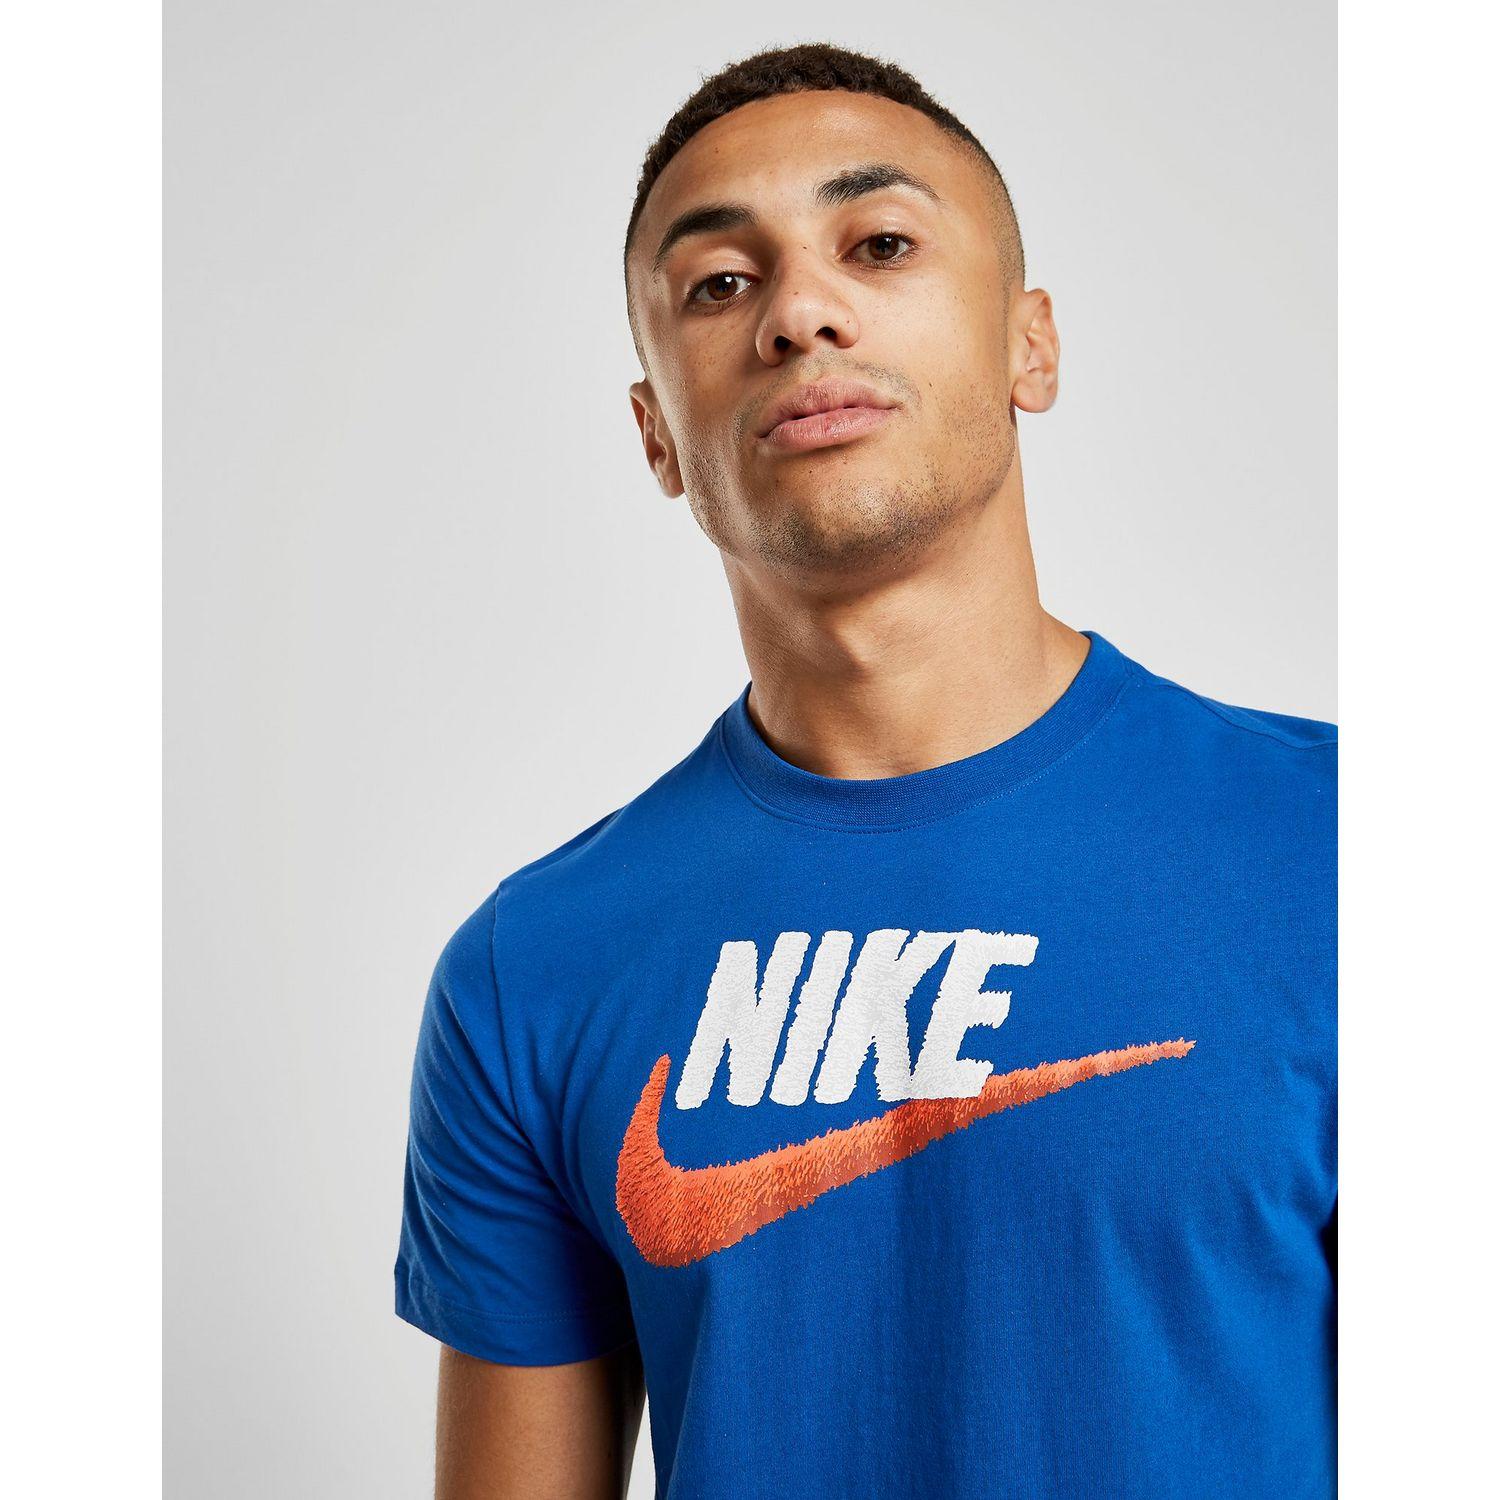 Buy > white and blue nike t shirt > in stock